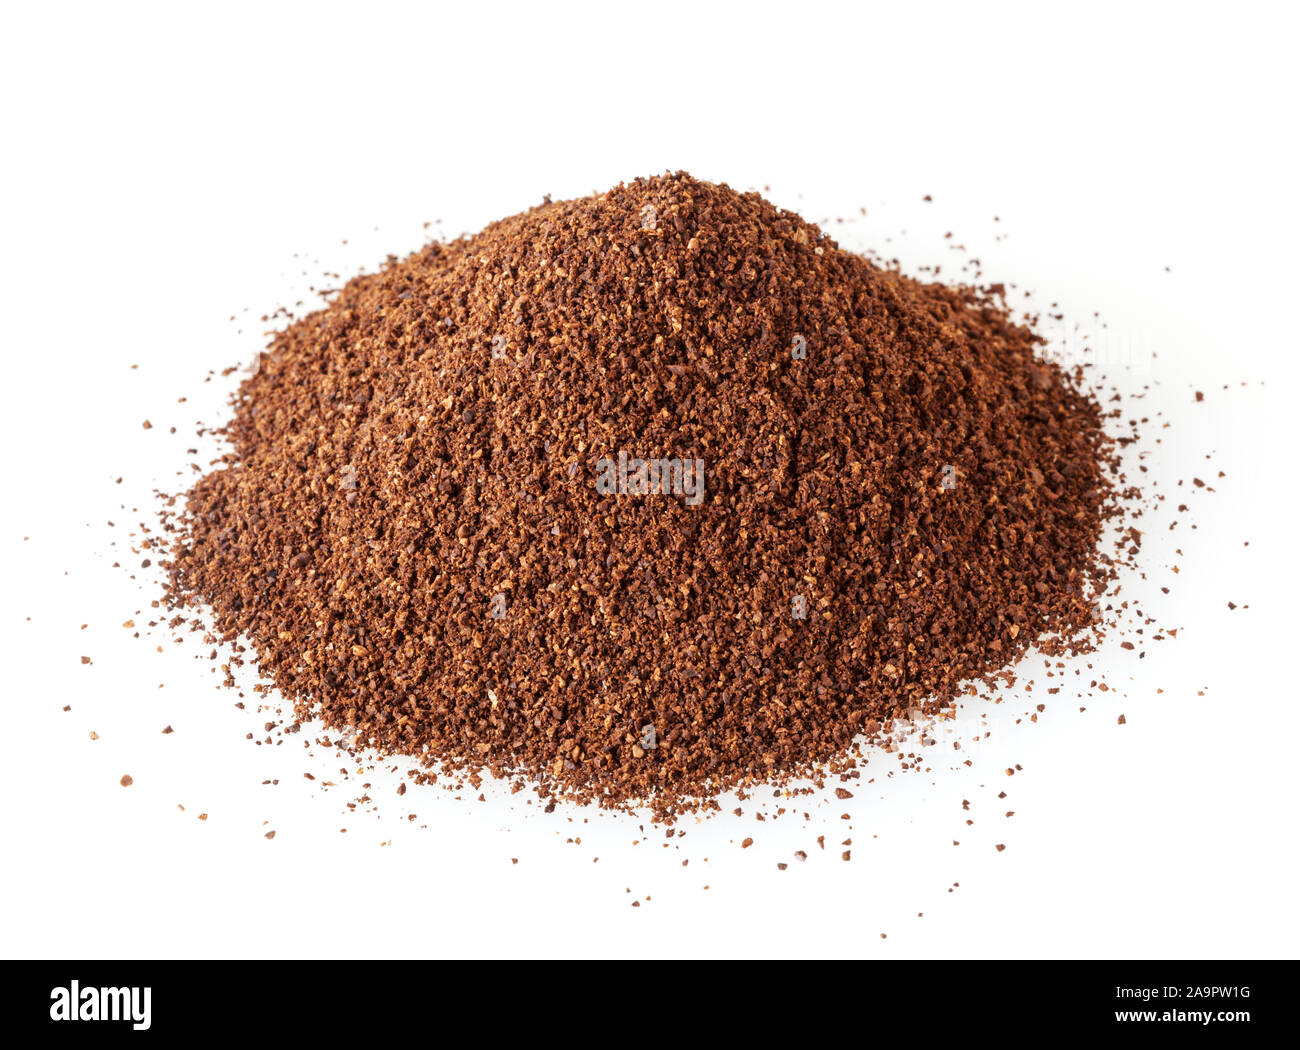 Heap of ground roasted coffee beans isolated on white background Stock Photo